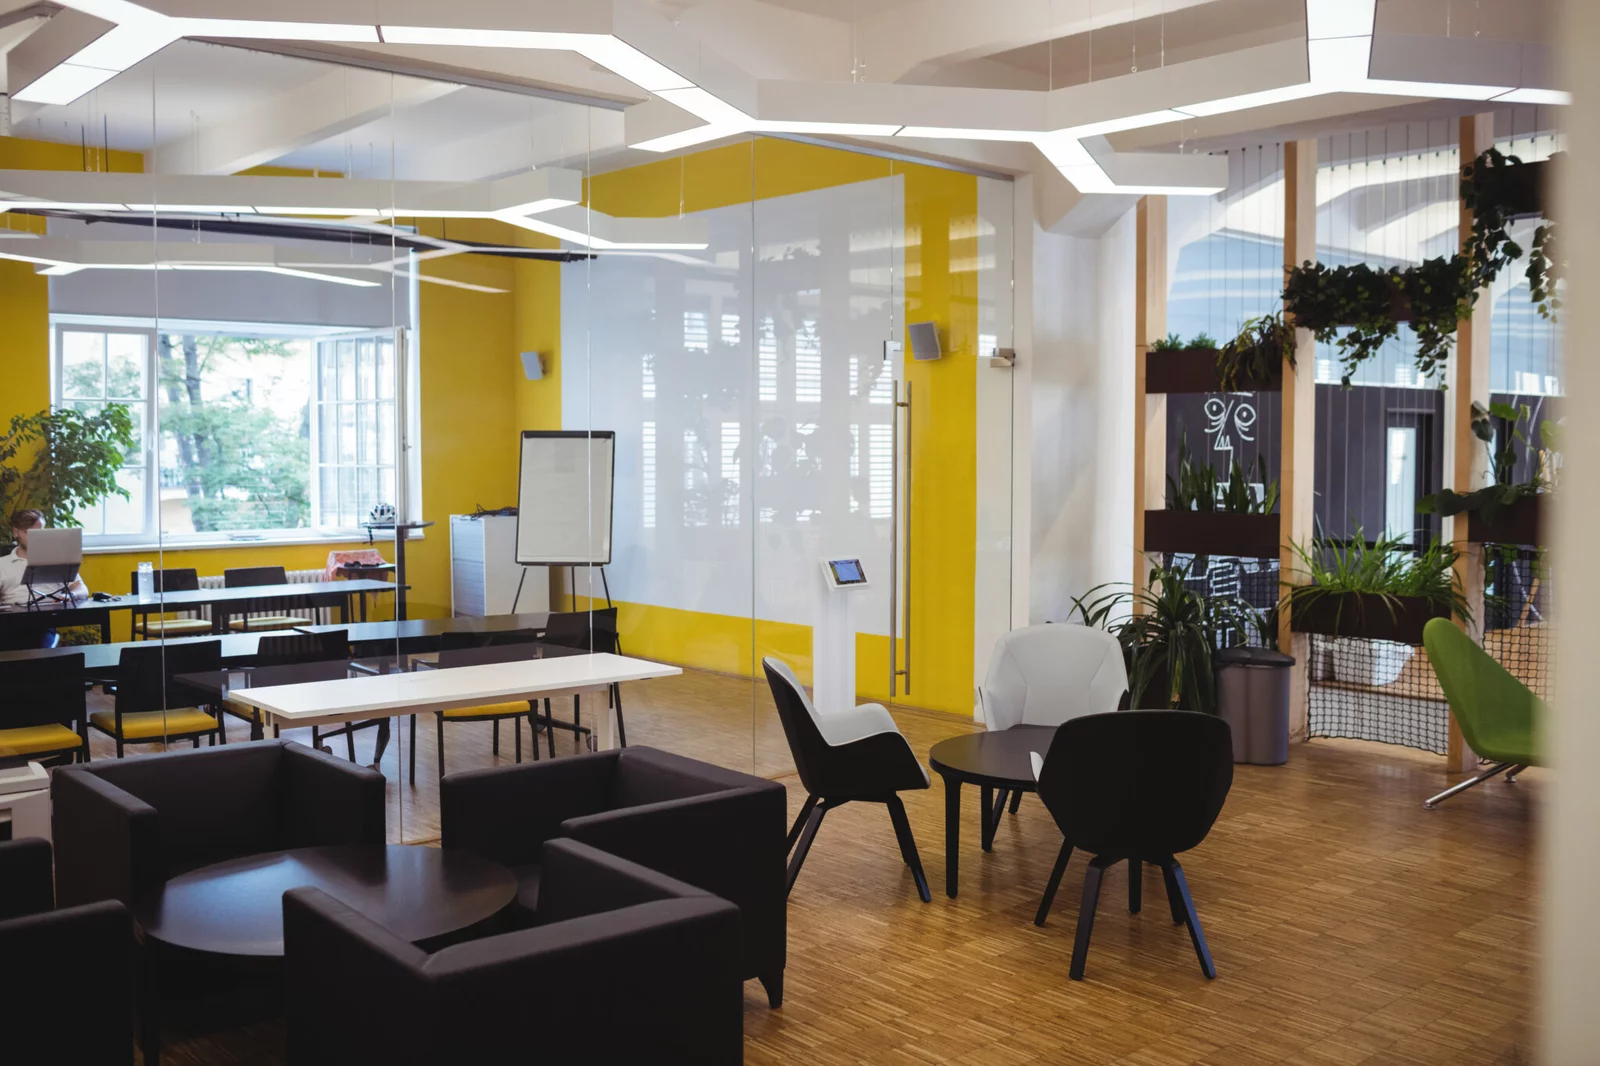 Top 5 Tips For Finding a Good Office Interior Design!